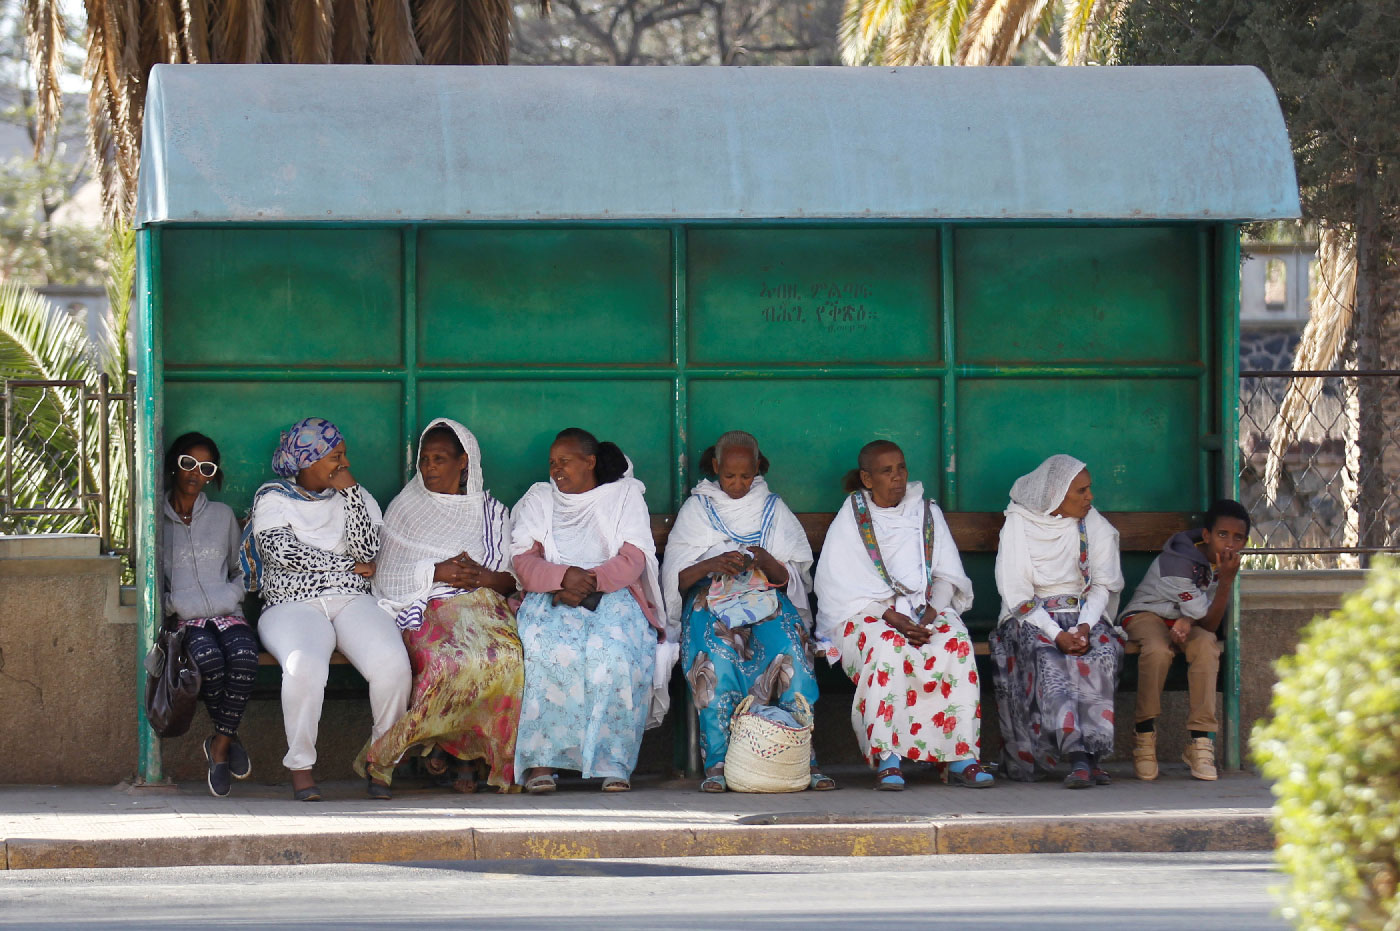 Passengers wait for the bus at a stop along a street in Asmara, Eritrea.